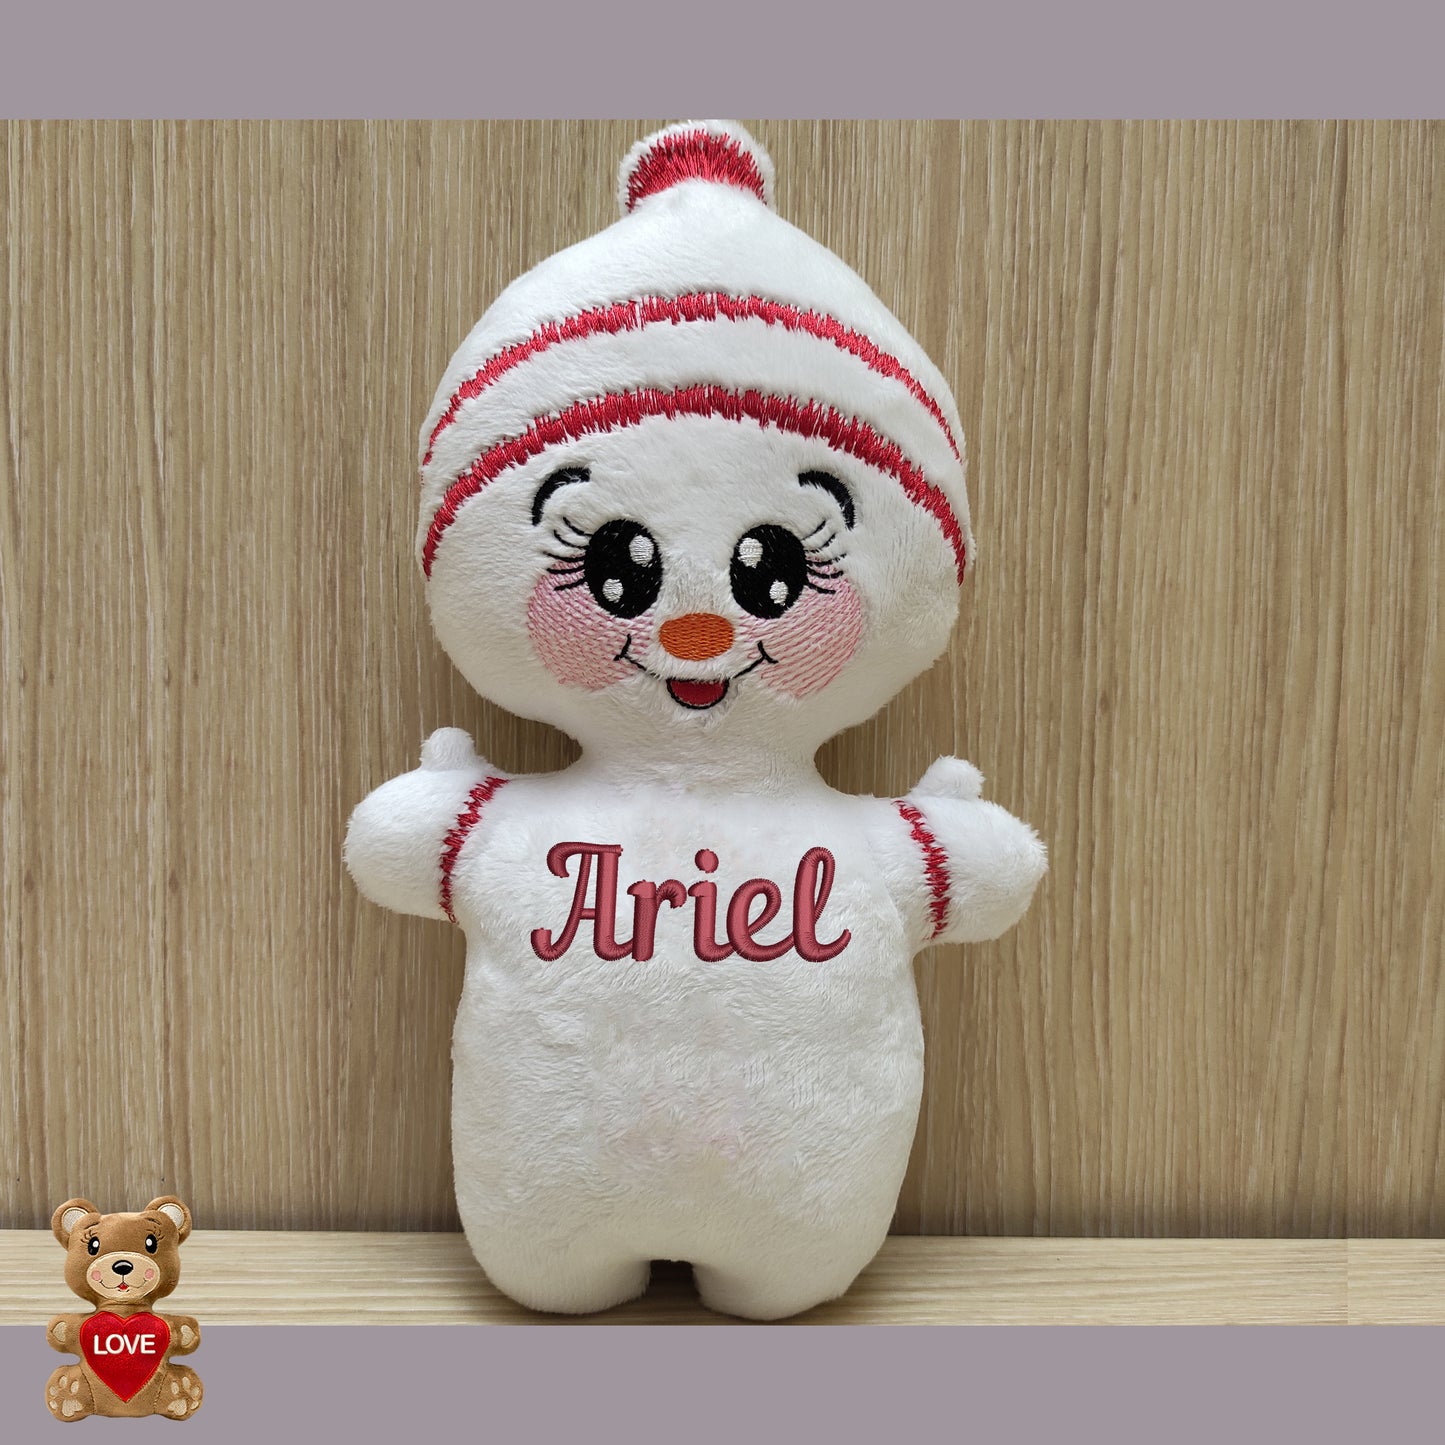 Personalised embroidery Plush Soft Toy Christmas Snowman ,Super cute personalised soft plush toy, Personalised Gift, Unique Personalized Birthday Gifts , Custom Gifts For Children